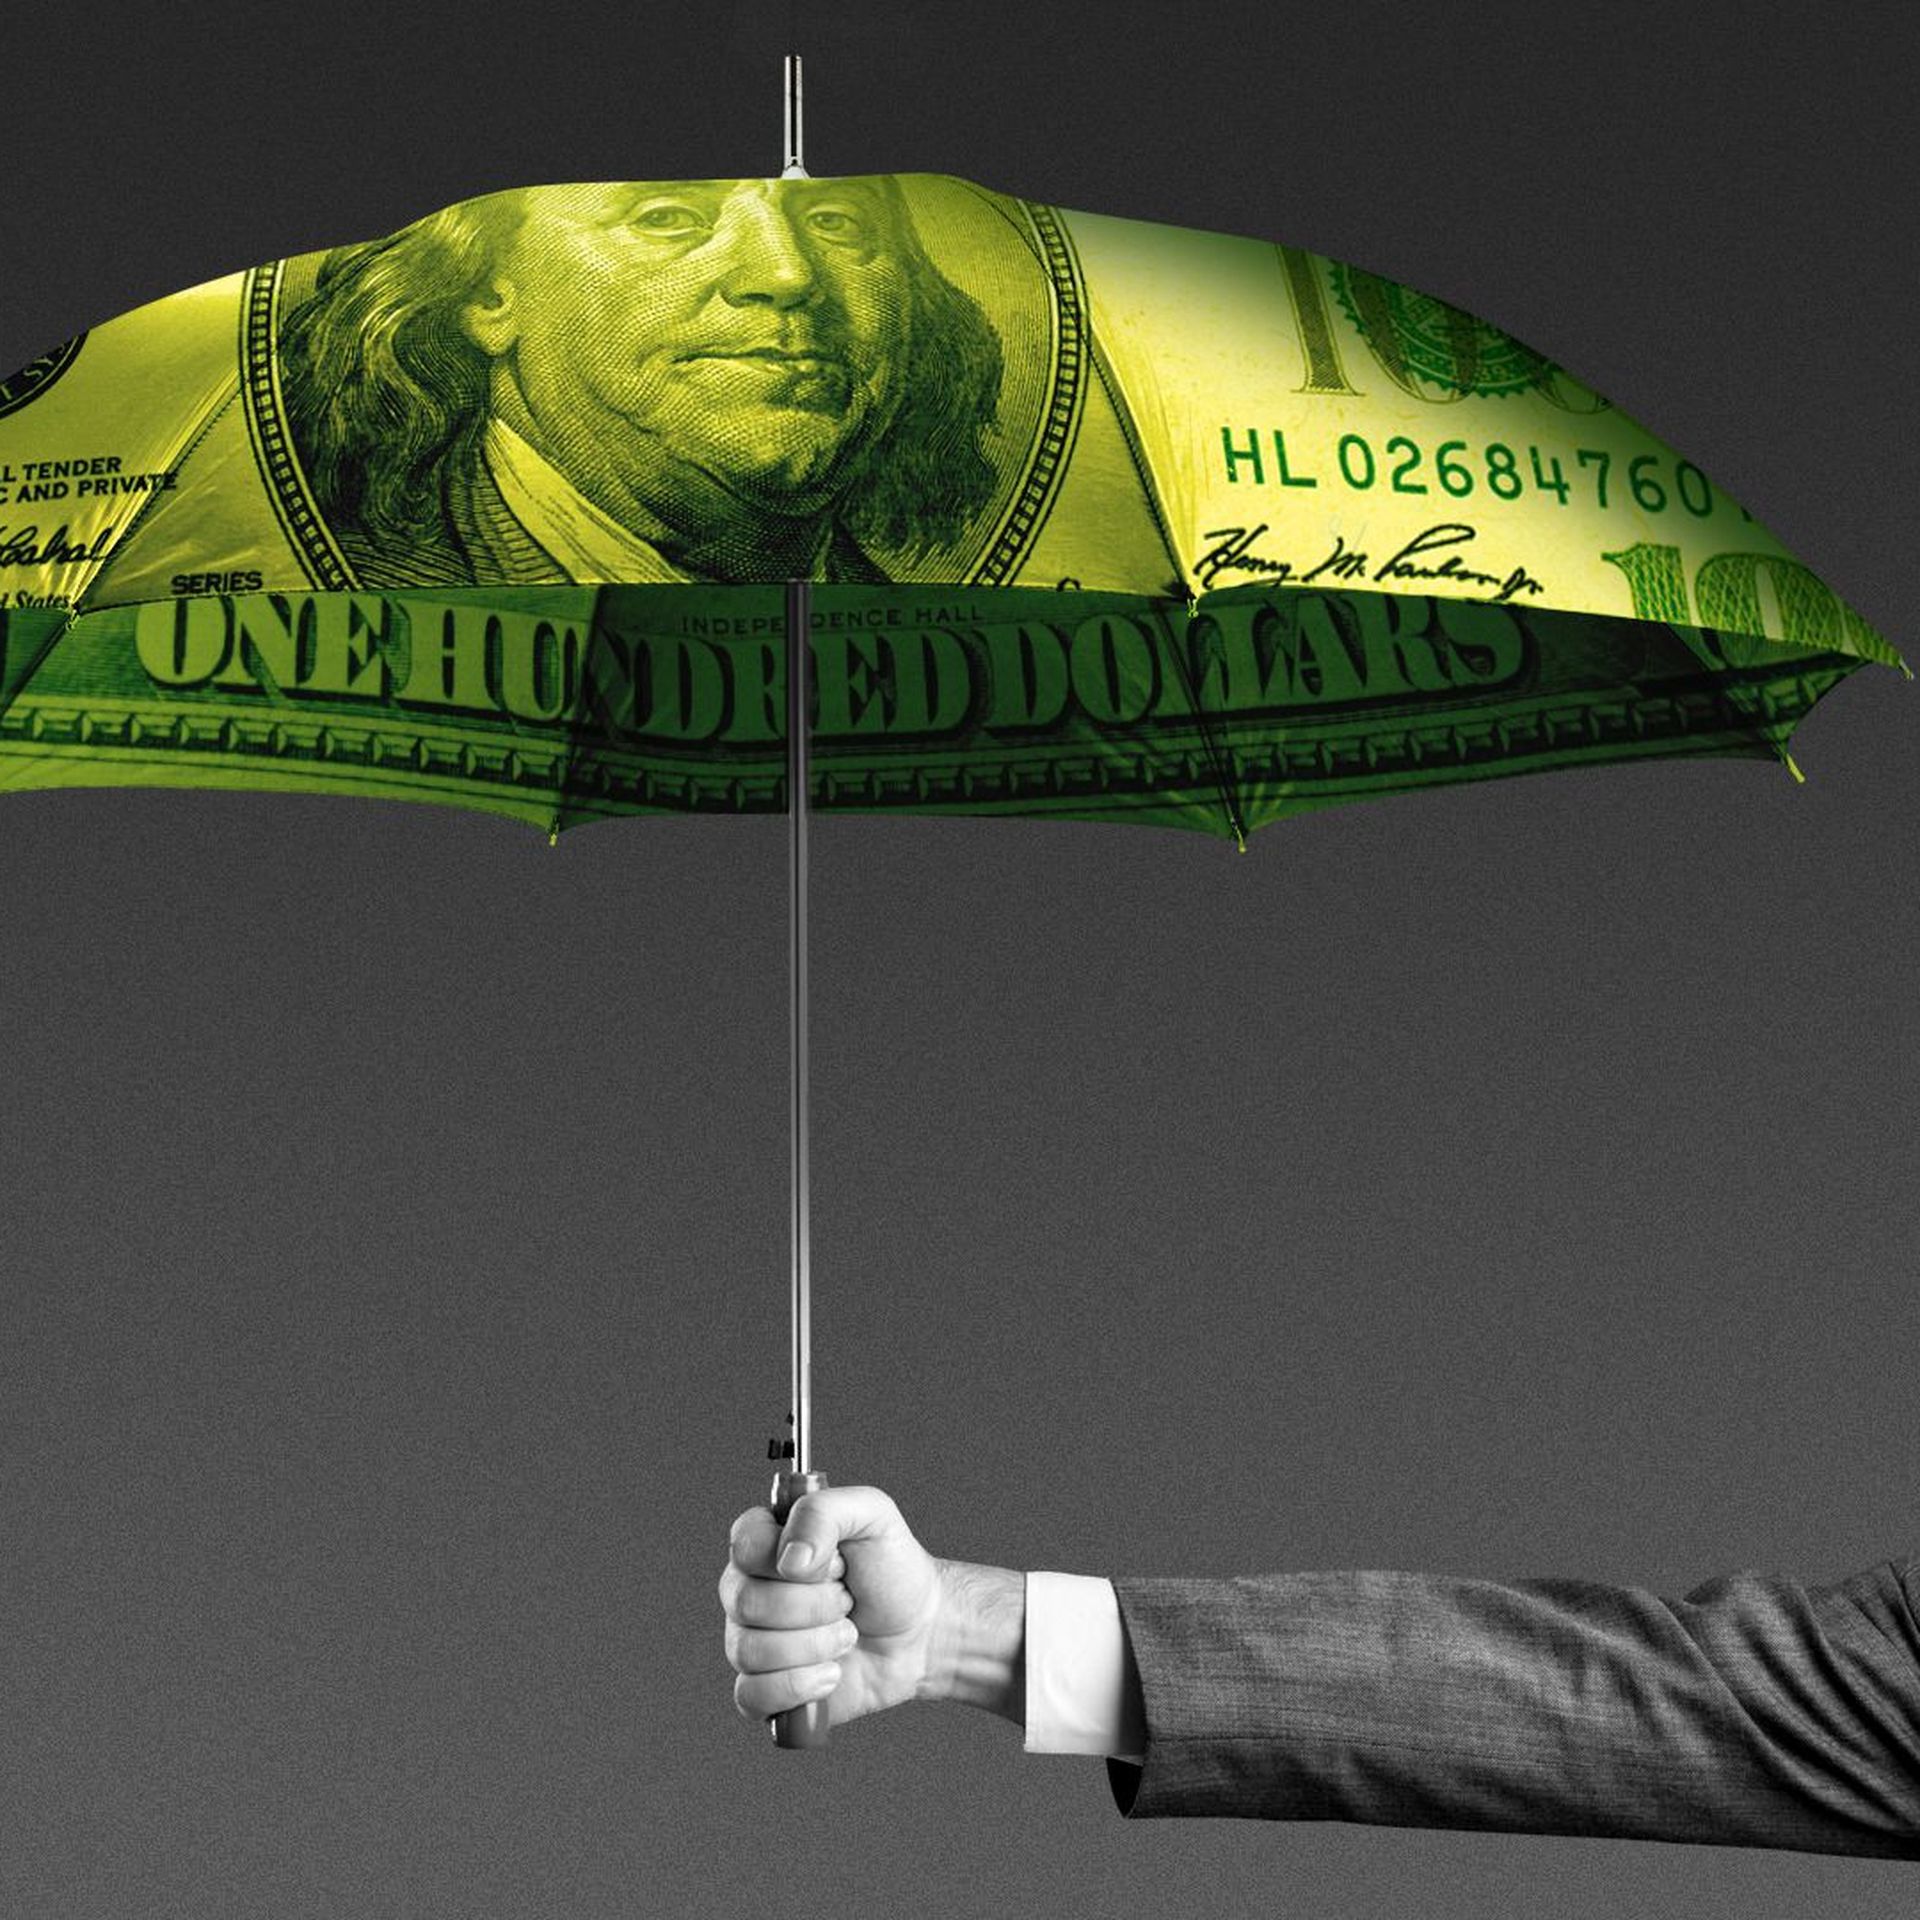 Illustration of a person in a suit holding an umbrella made of money